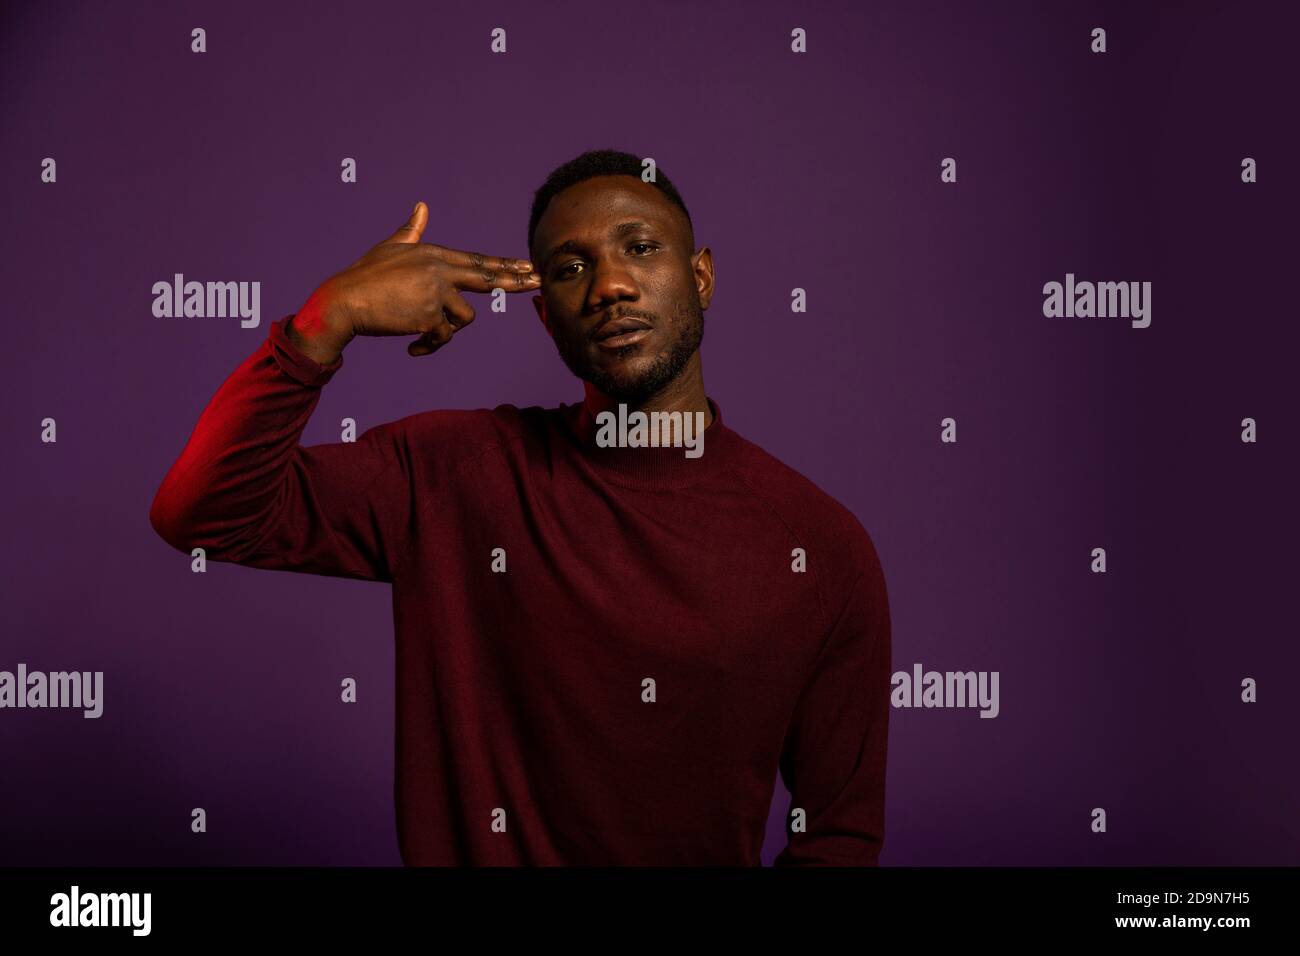 Young black man showing the shoot me hand gesture with fingers to temple. Medium shot. Isolated background. Looking at camera. Stock Photo